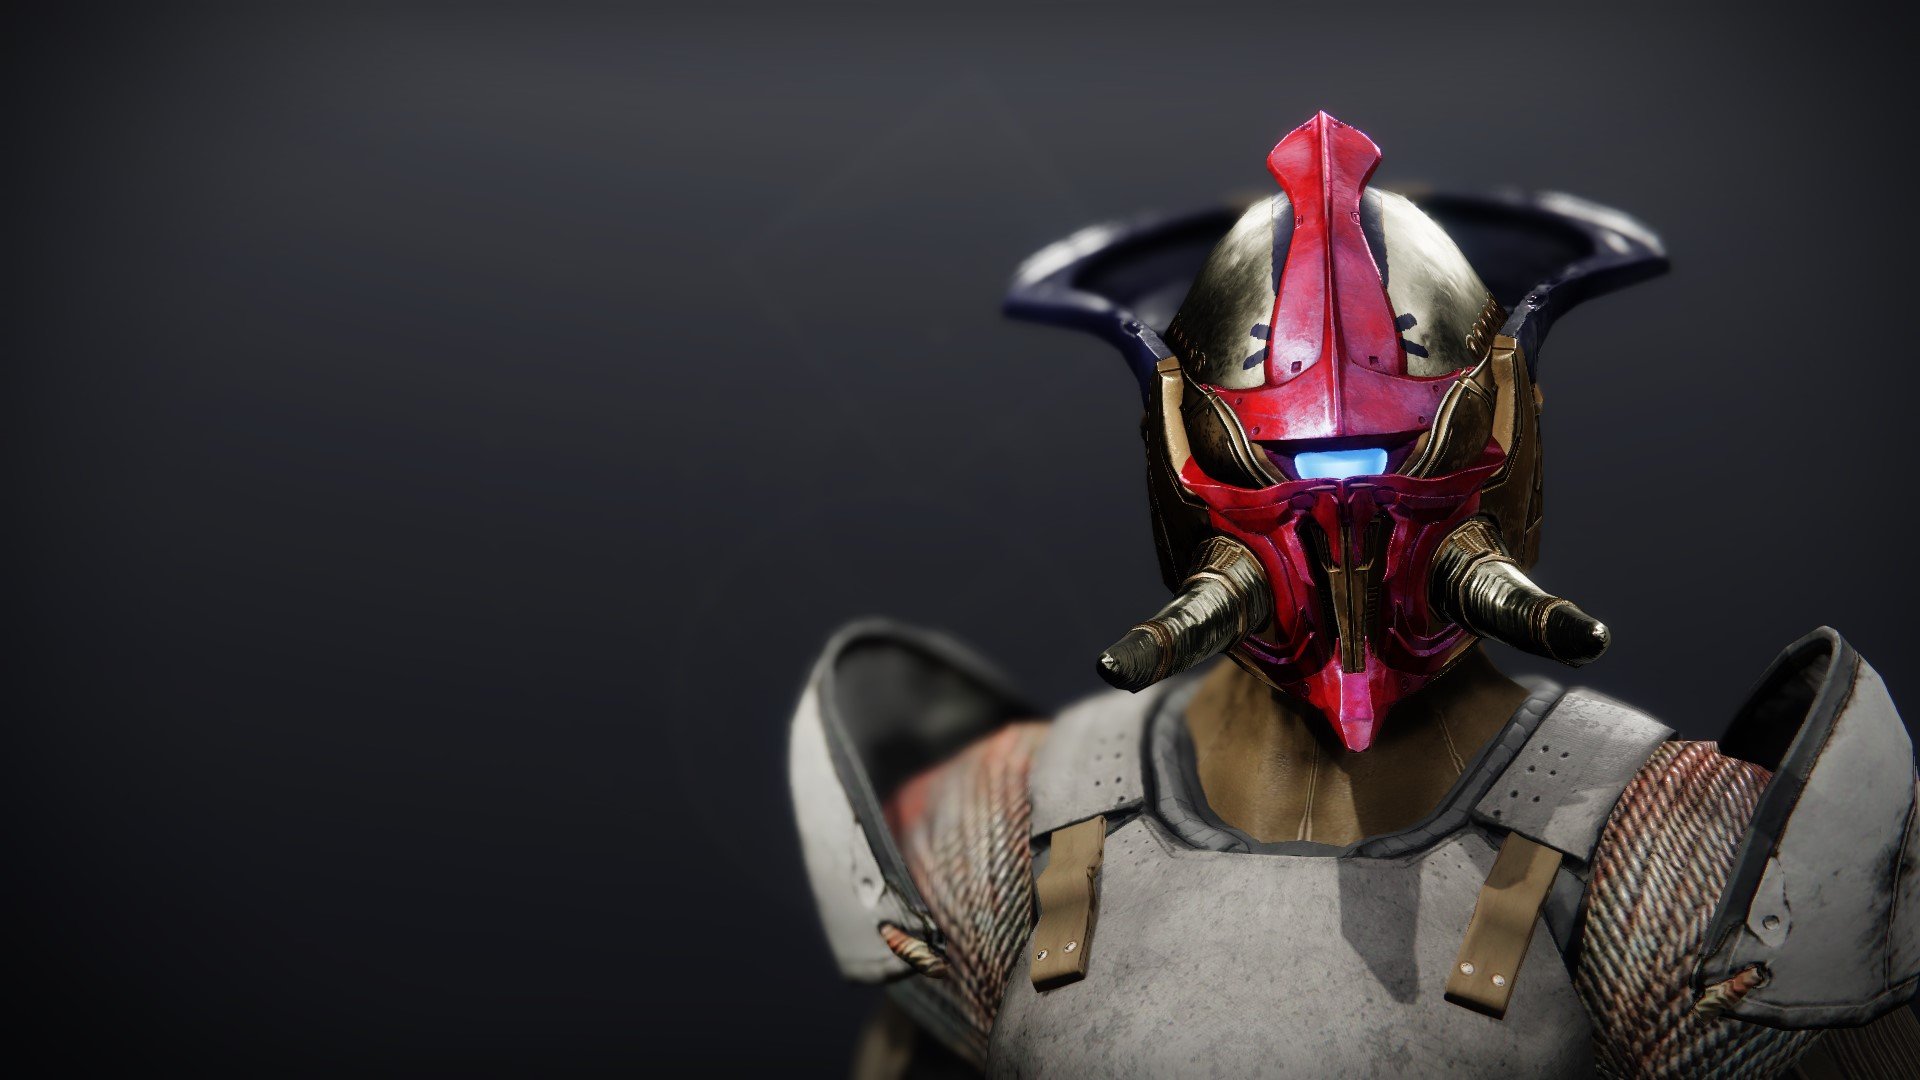 An in-game render of the Tusked Allegiance Helmet.